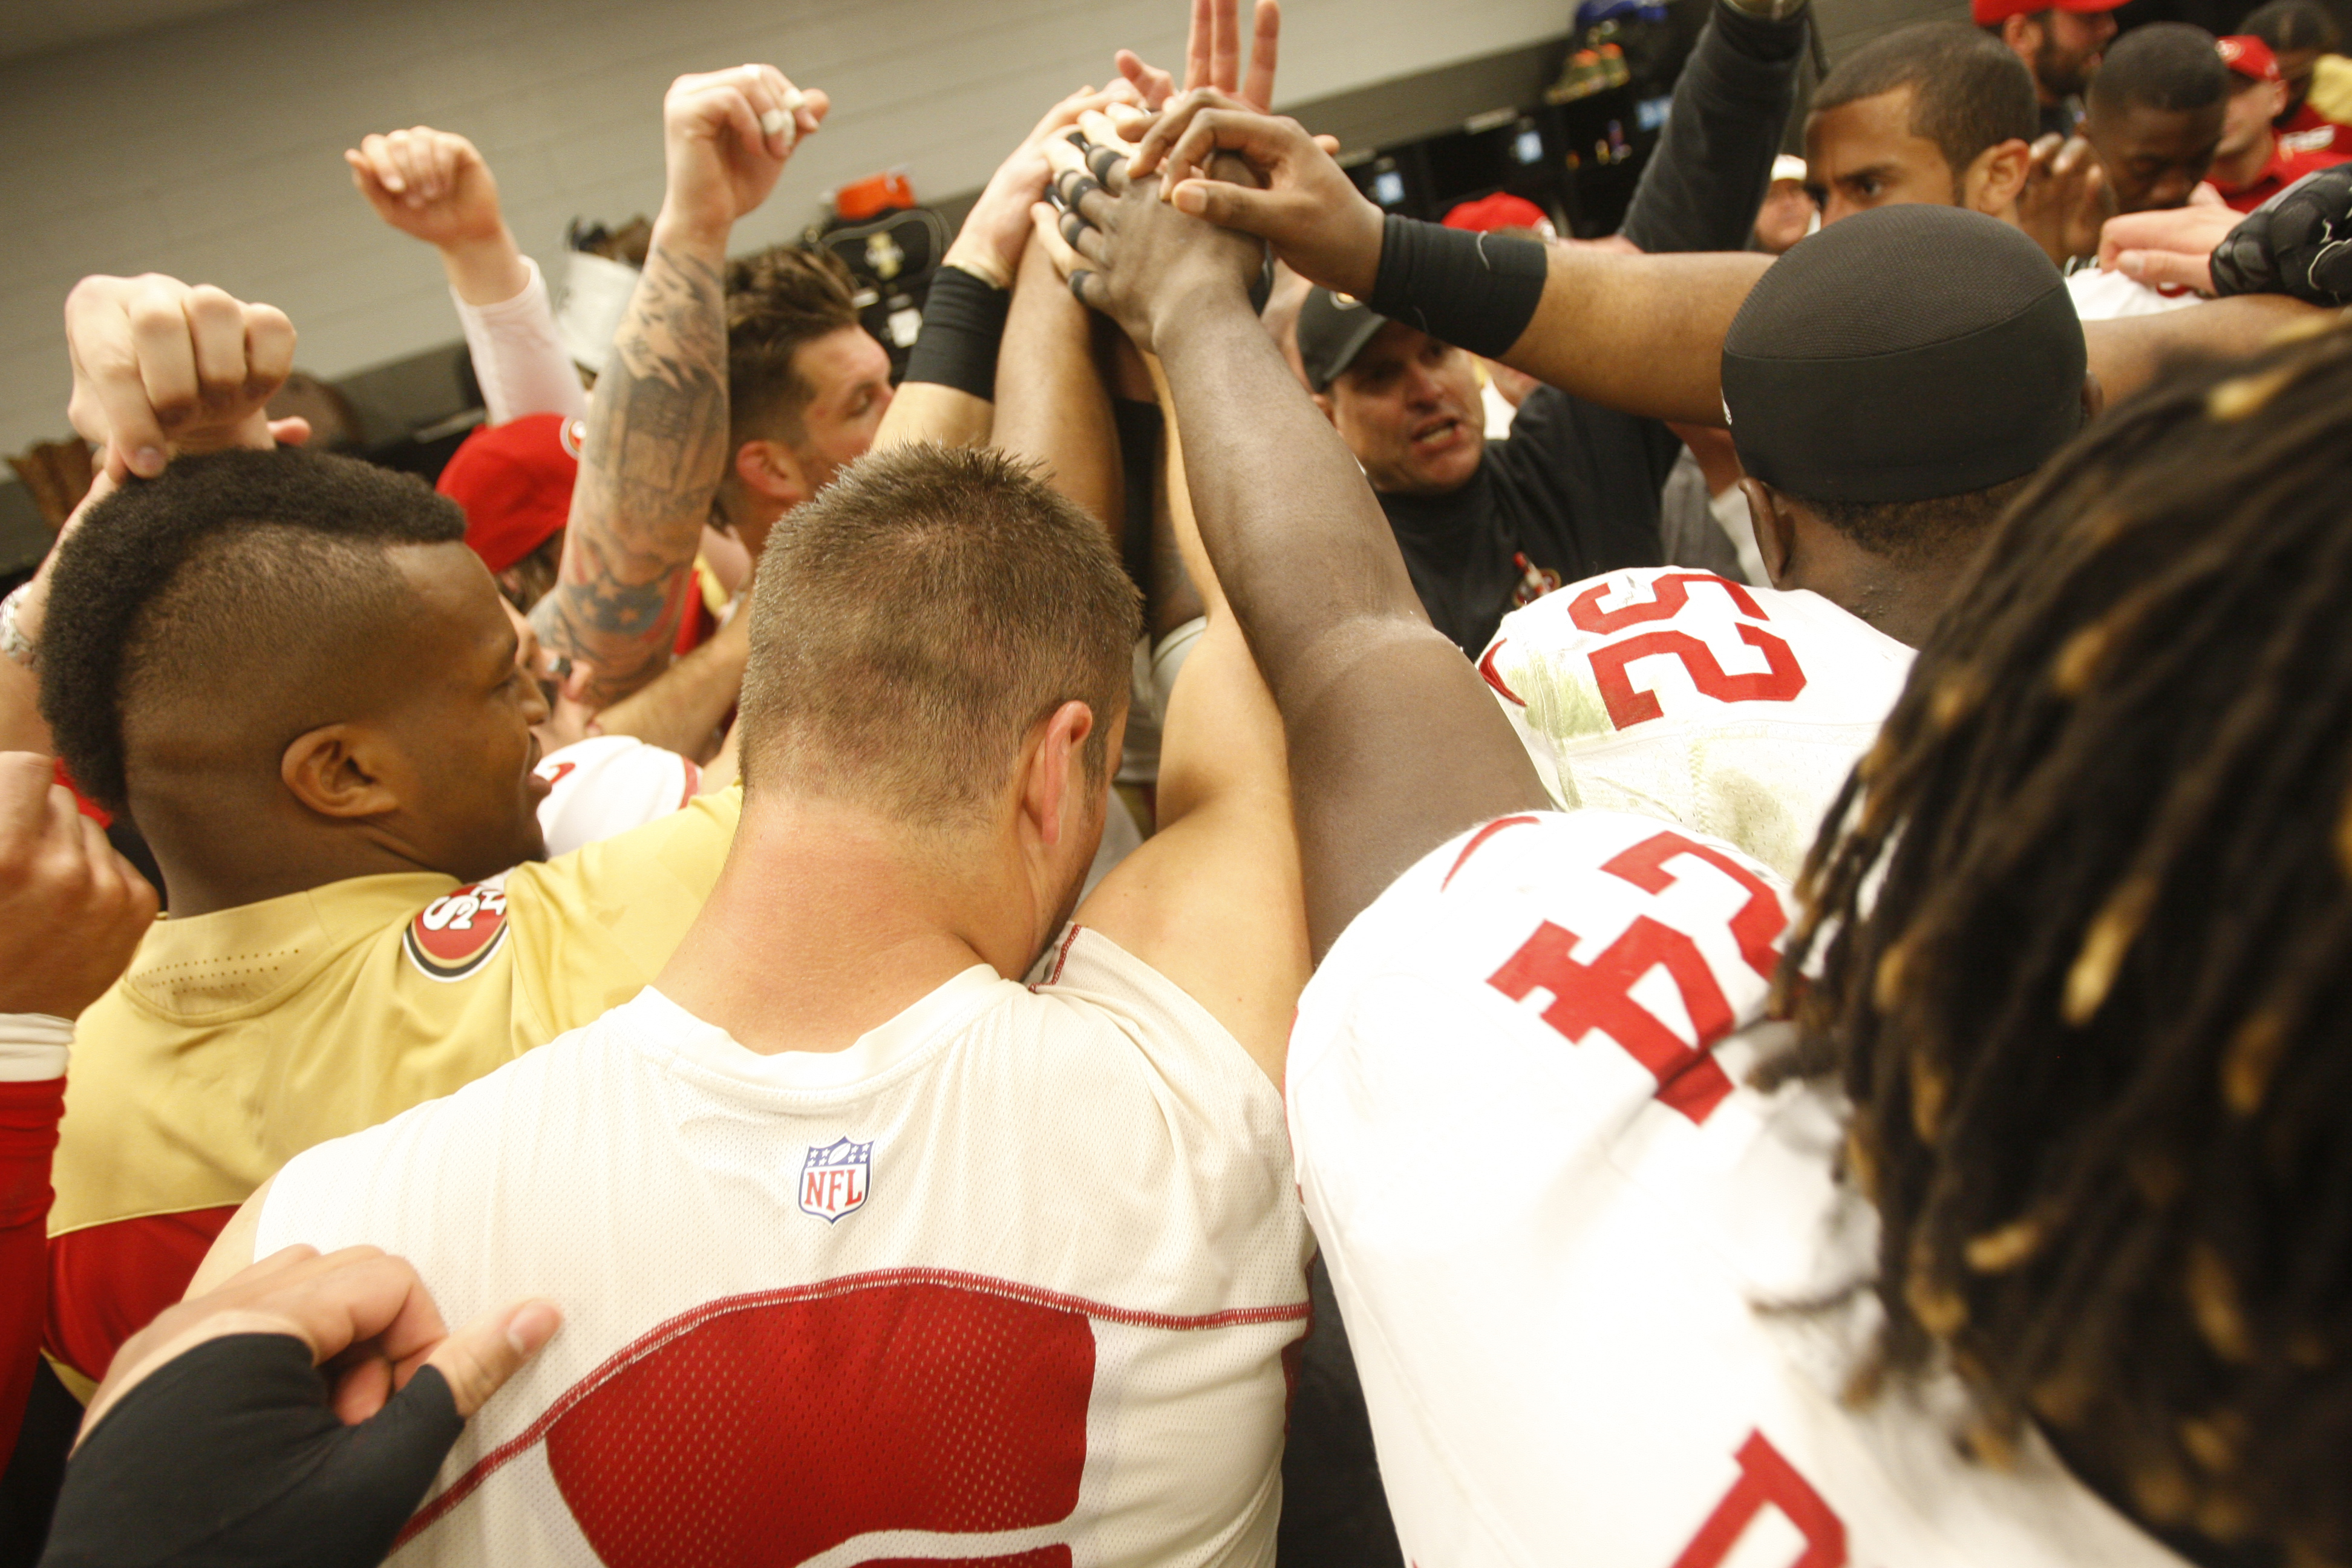 The San Francisco 49ers chant in the locker room following the game against the Carolina Panthers at Bank of America Stadium on January 12, 2014 in Charlotte, North Carolina. (Michael Zagaris—Getty Images)